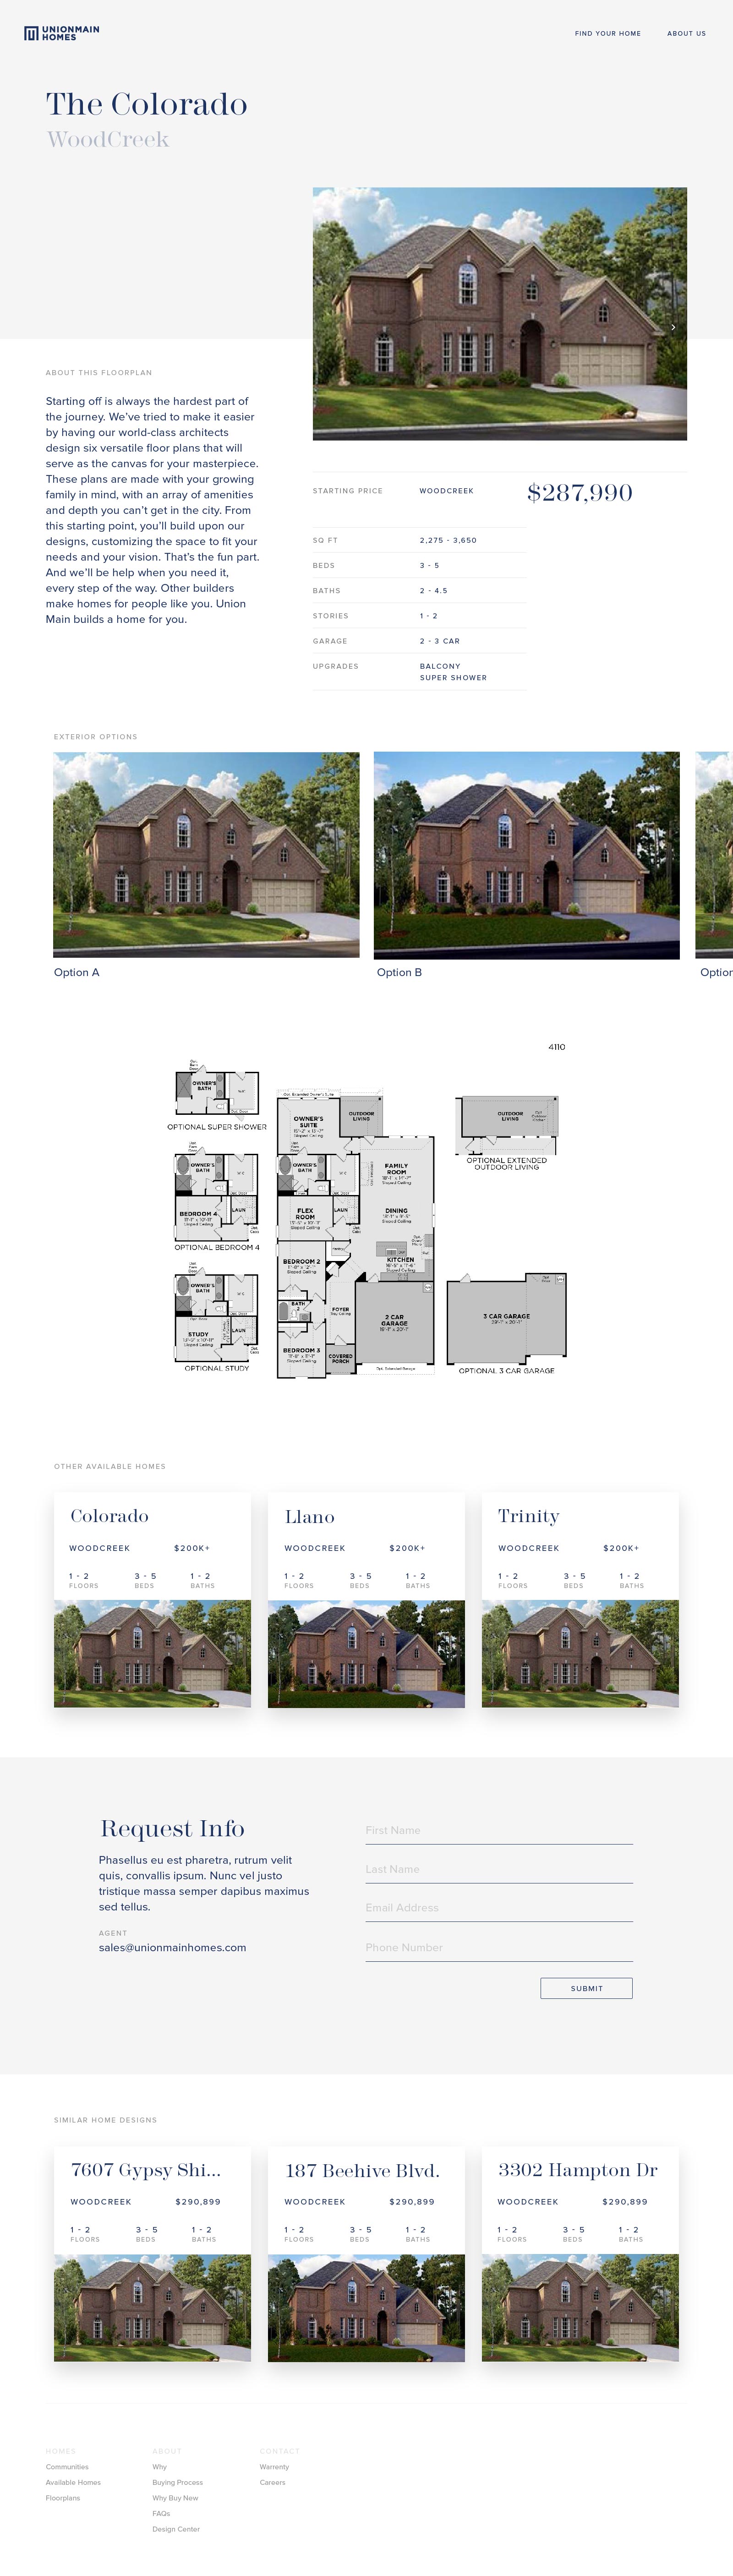 image of union main homes website